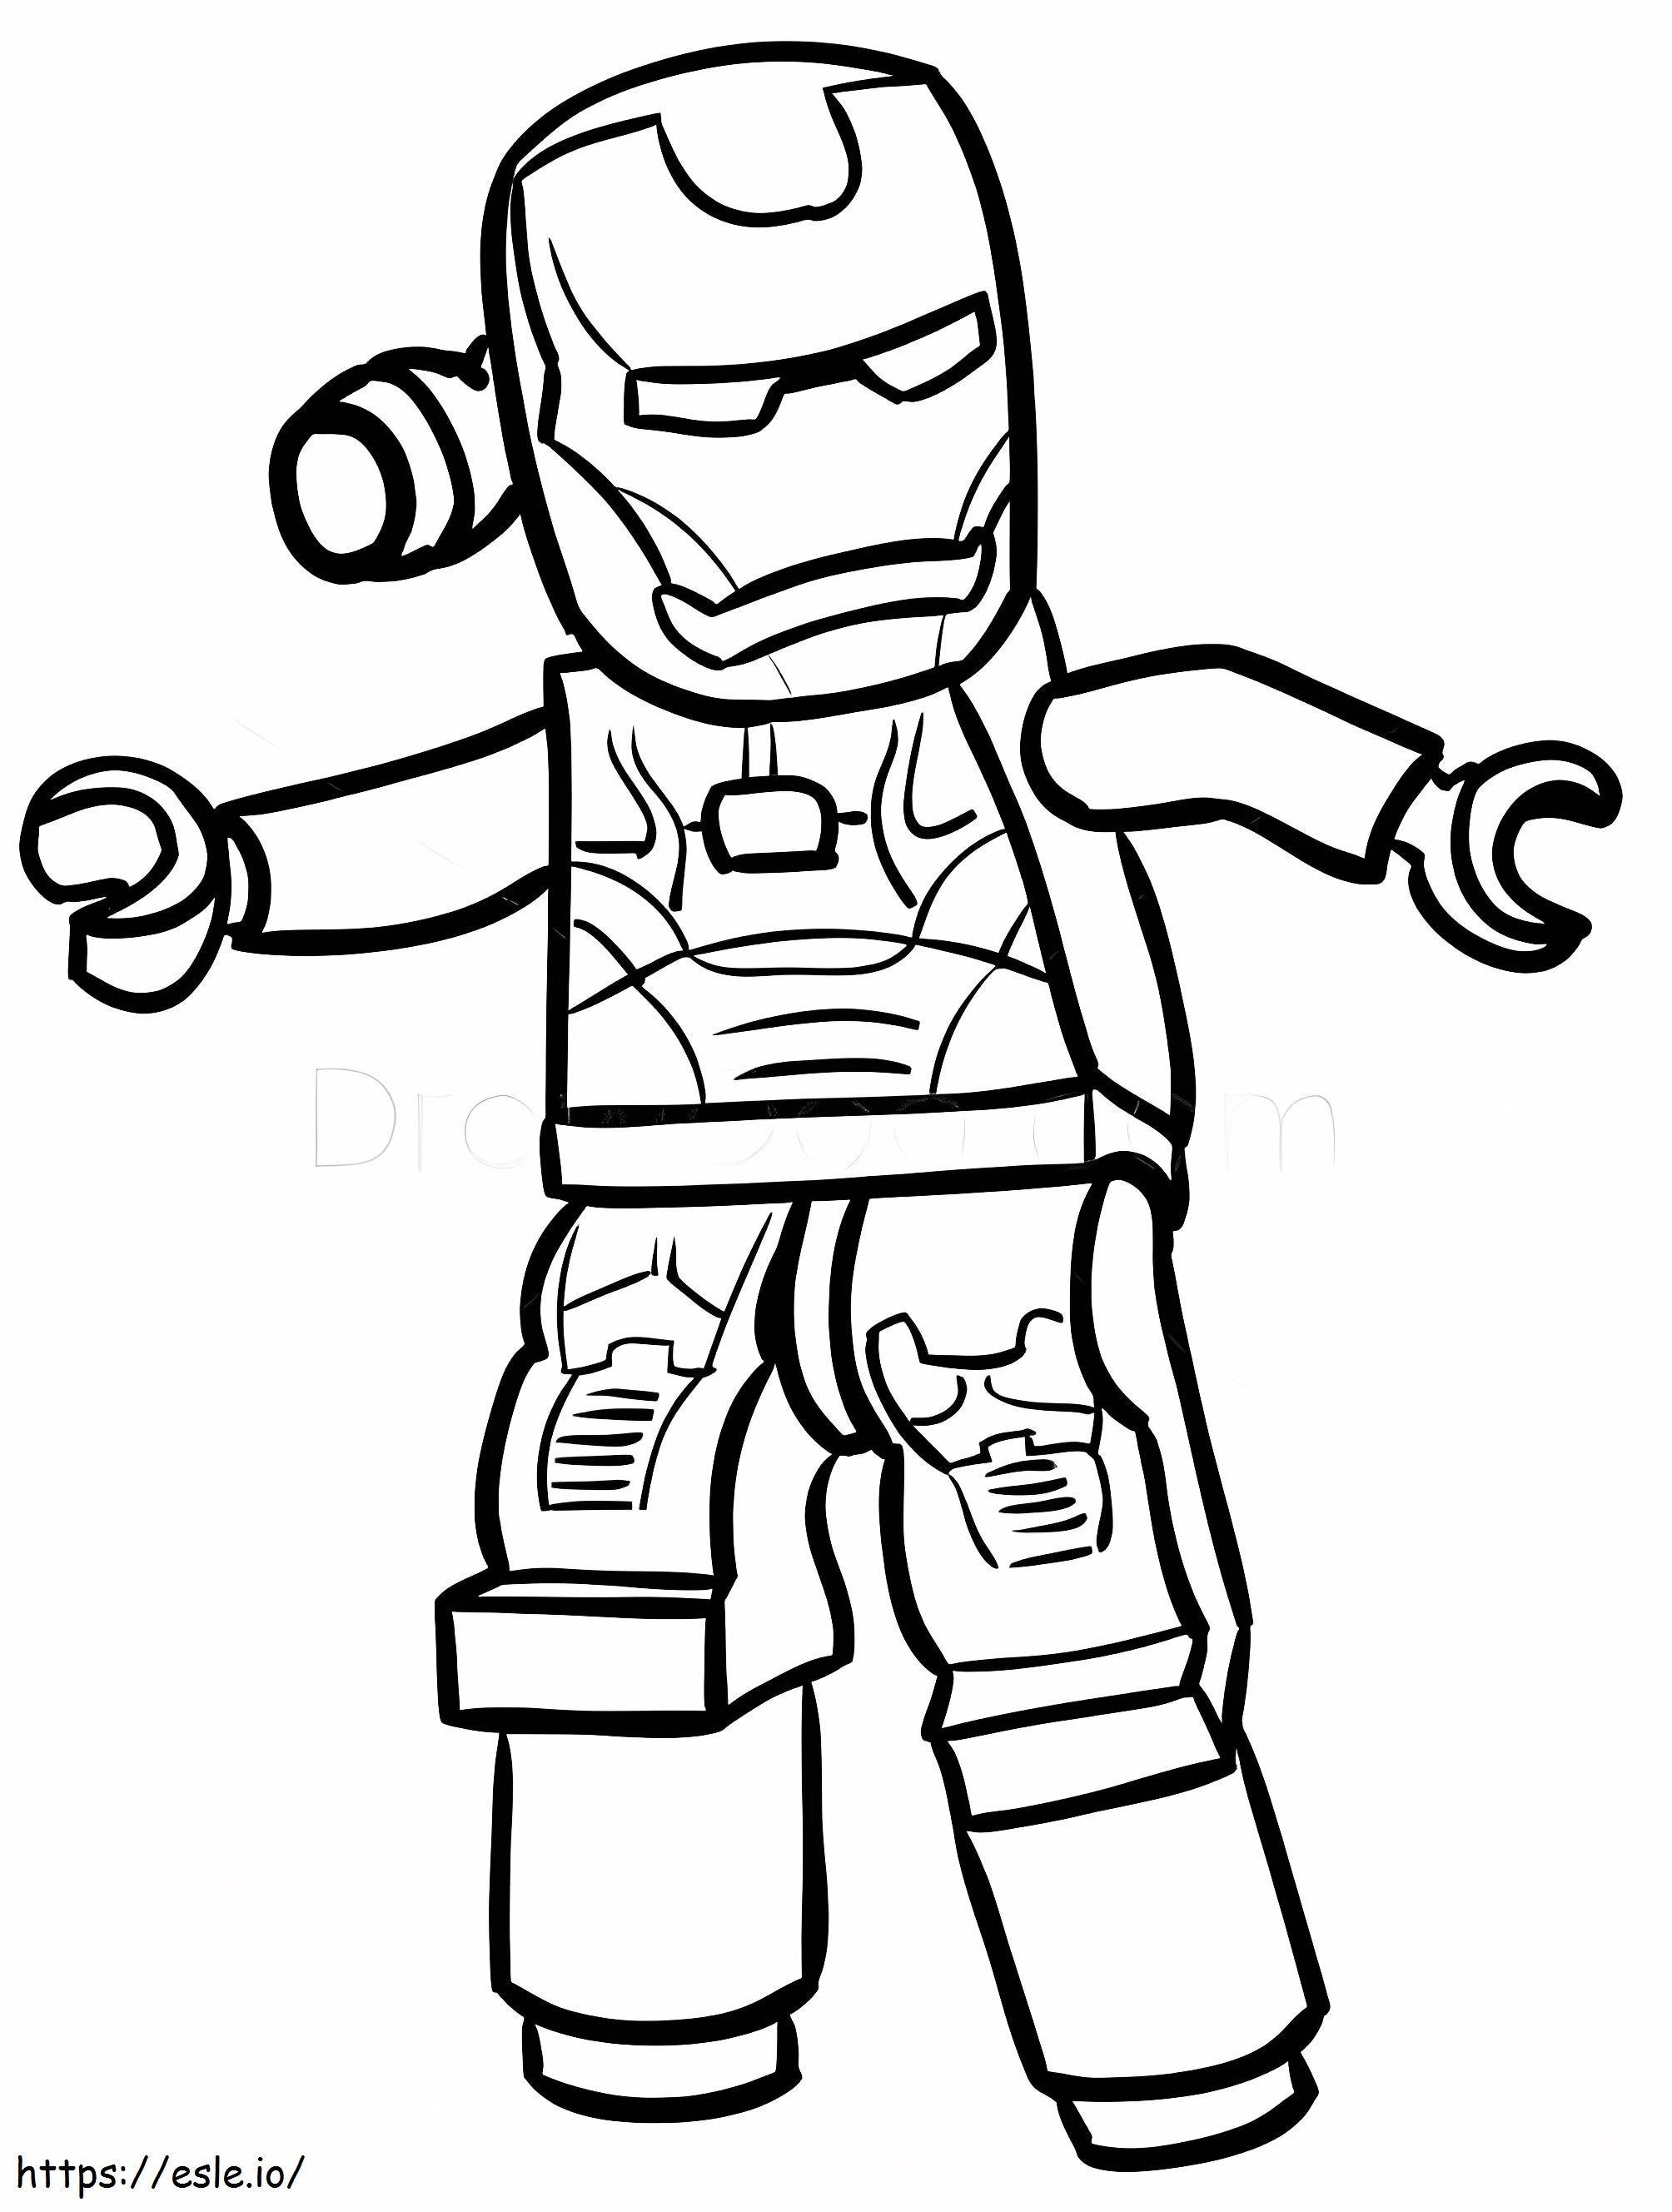 Lego War Machine coloring page